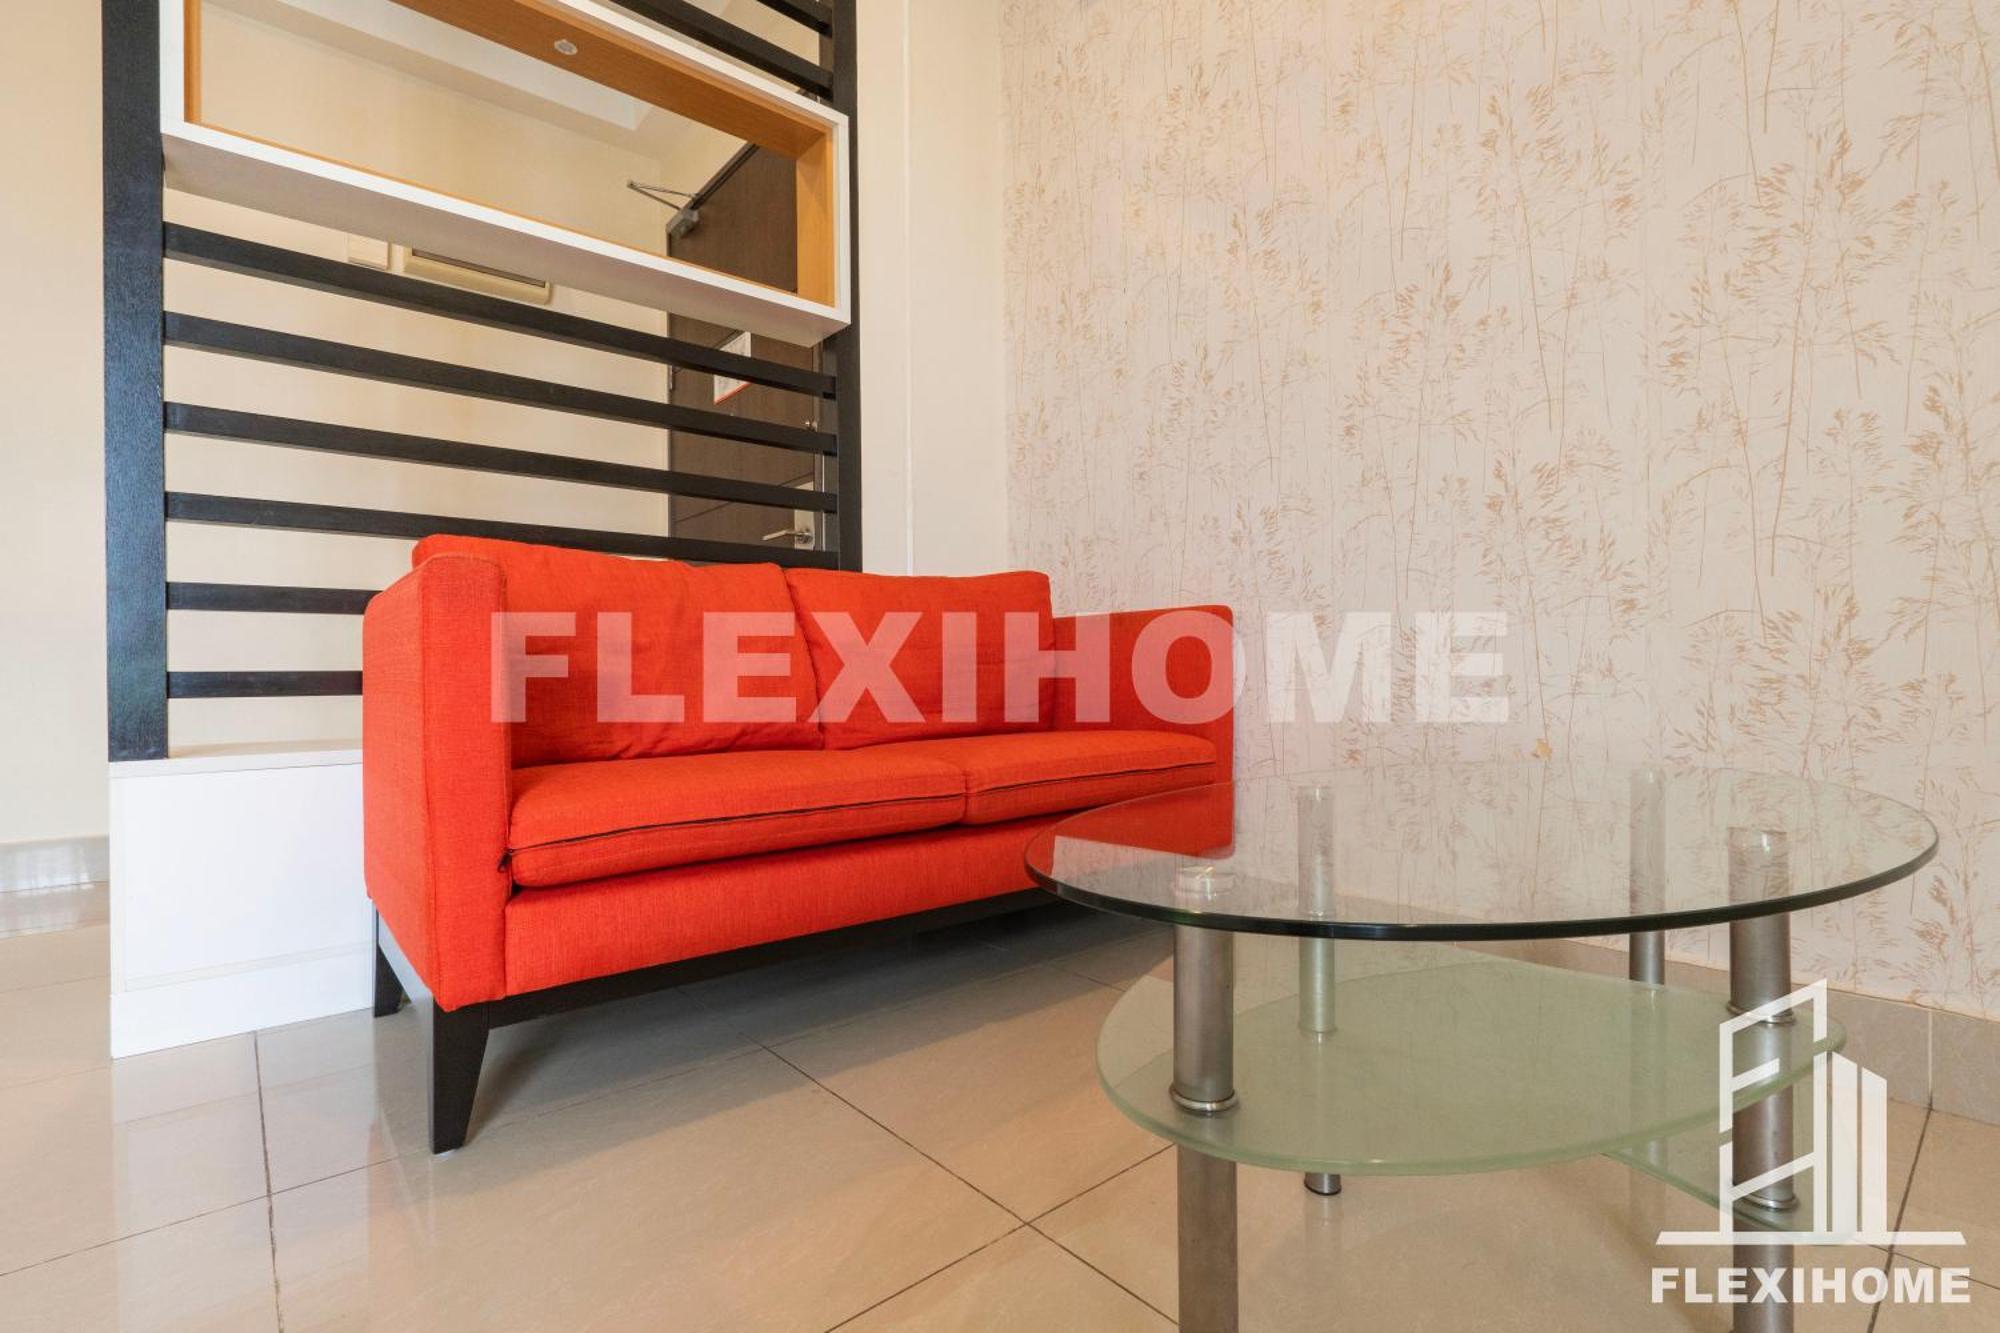 9Am-5Pm, Same Day Check In And Check Out, Work From Home, Shaftsbury-Cyberjaya, Comfy Home By Flexihome-My ภายนอก รูปภาพ